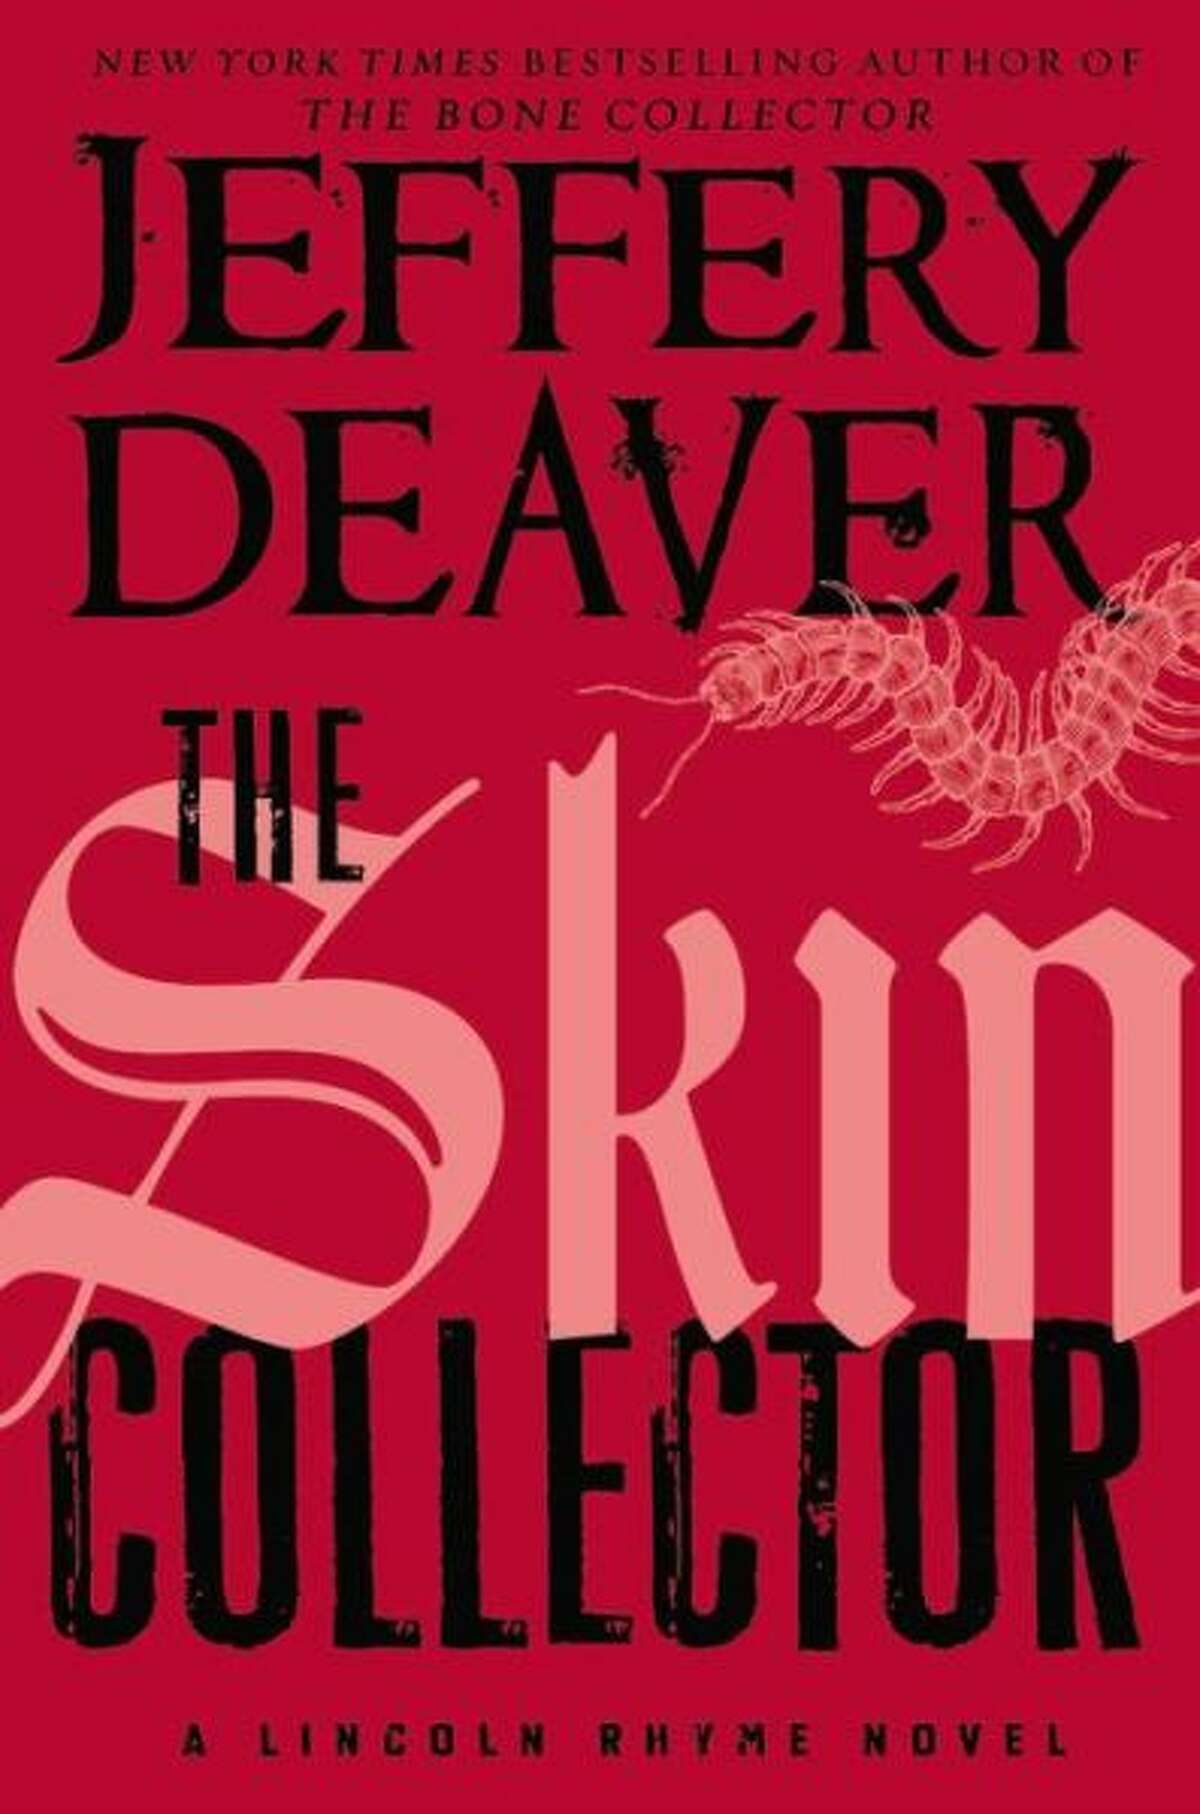 "The Skin Collector" by Jeffery Deaver